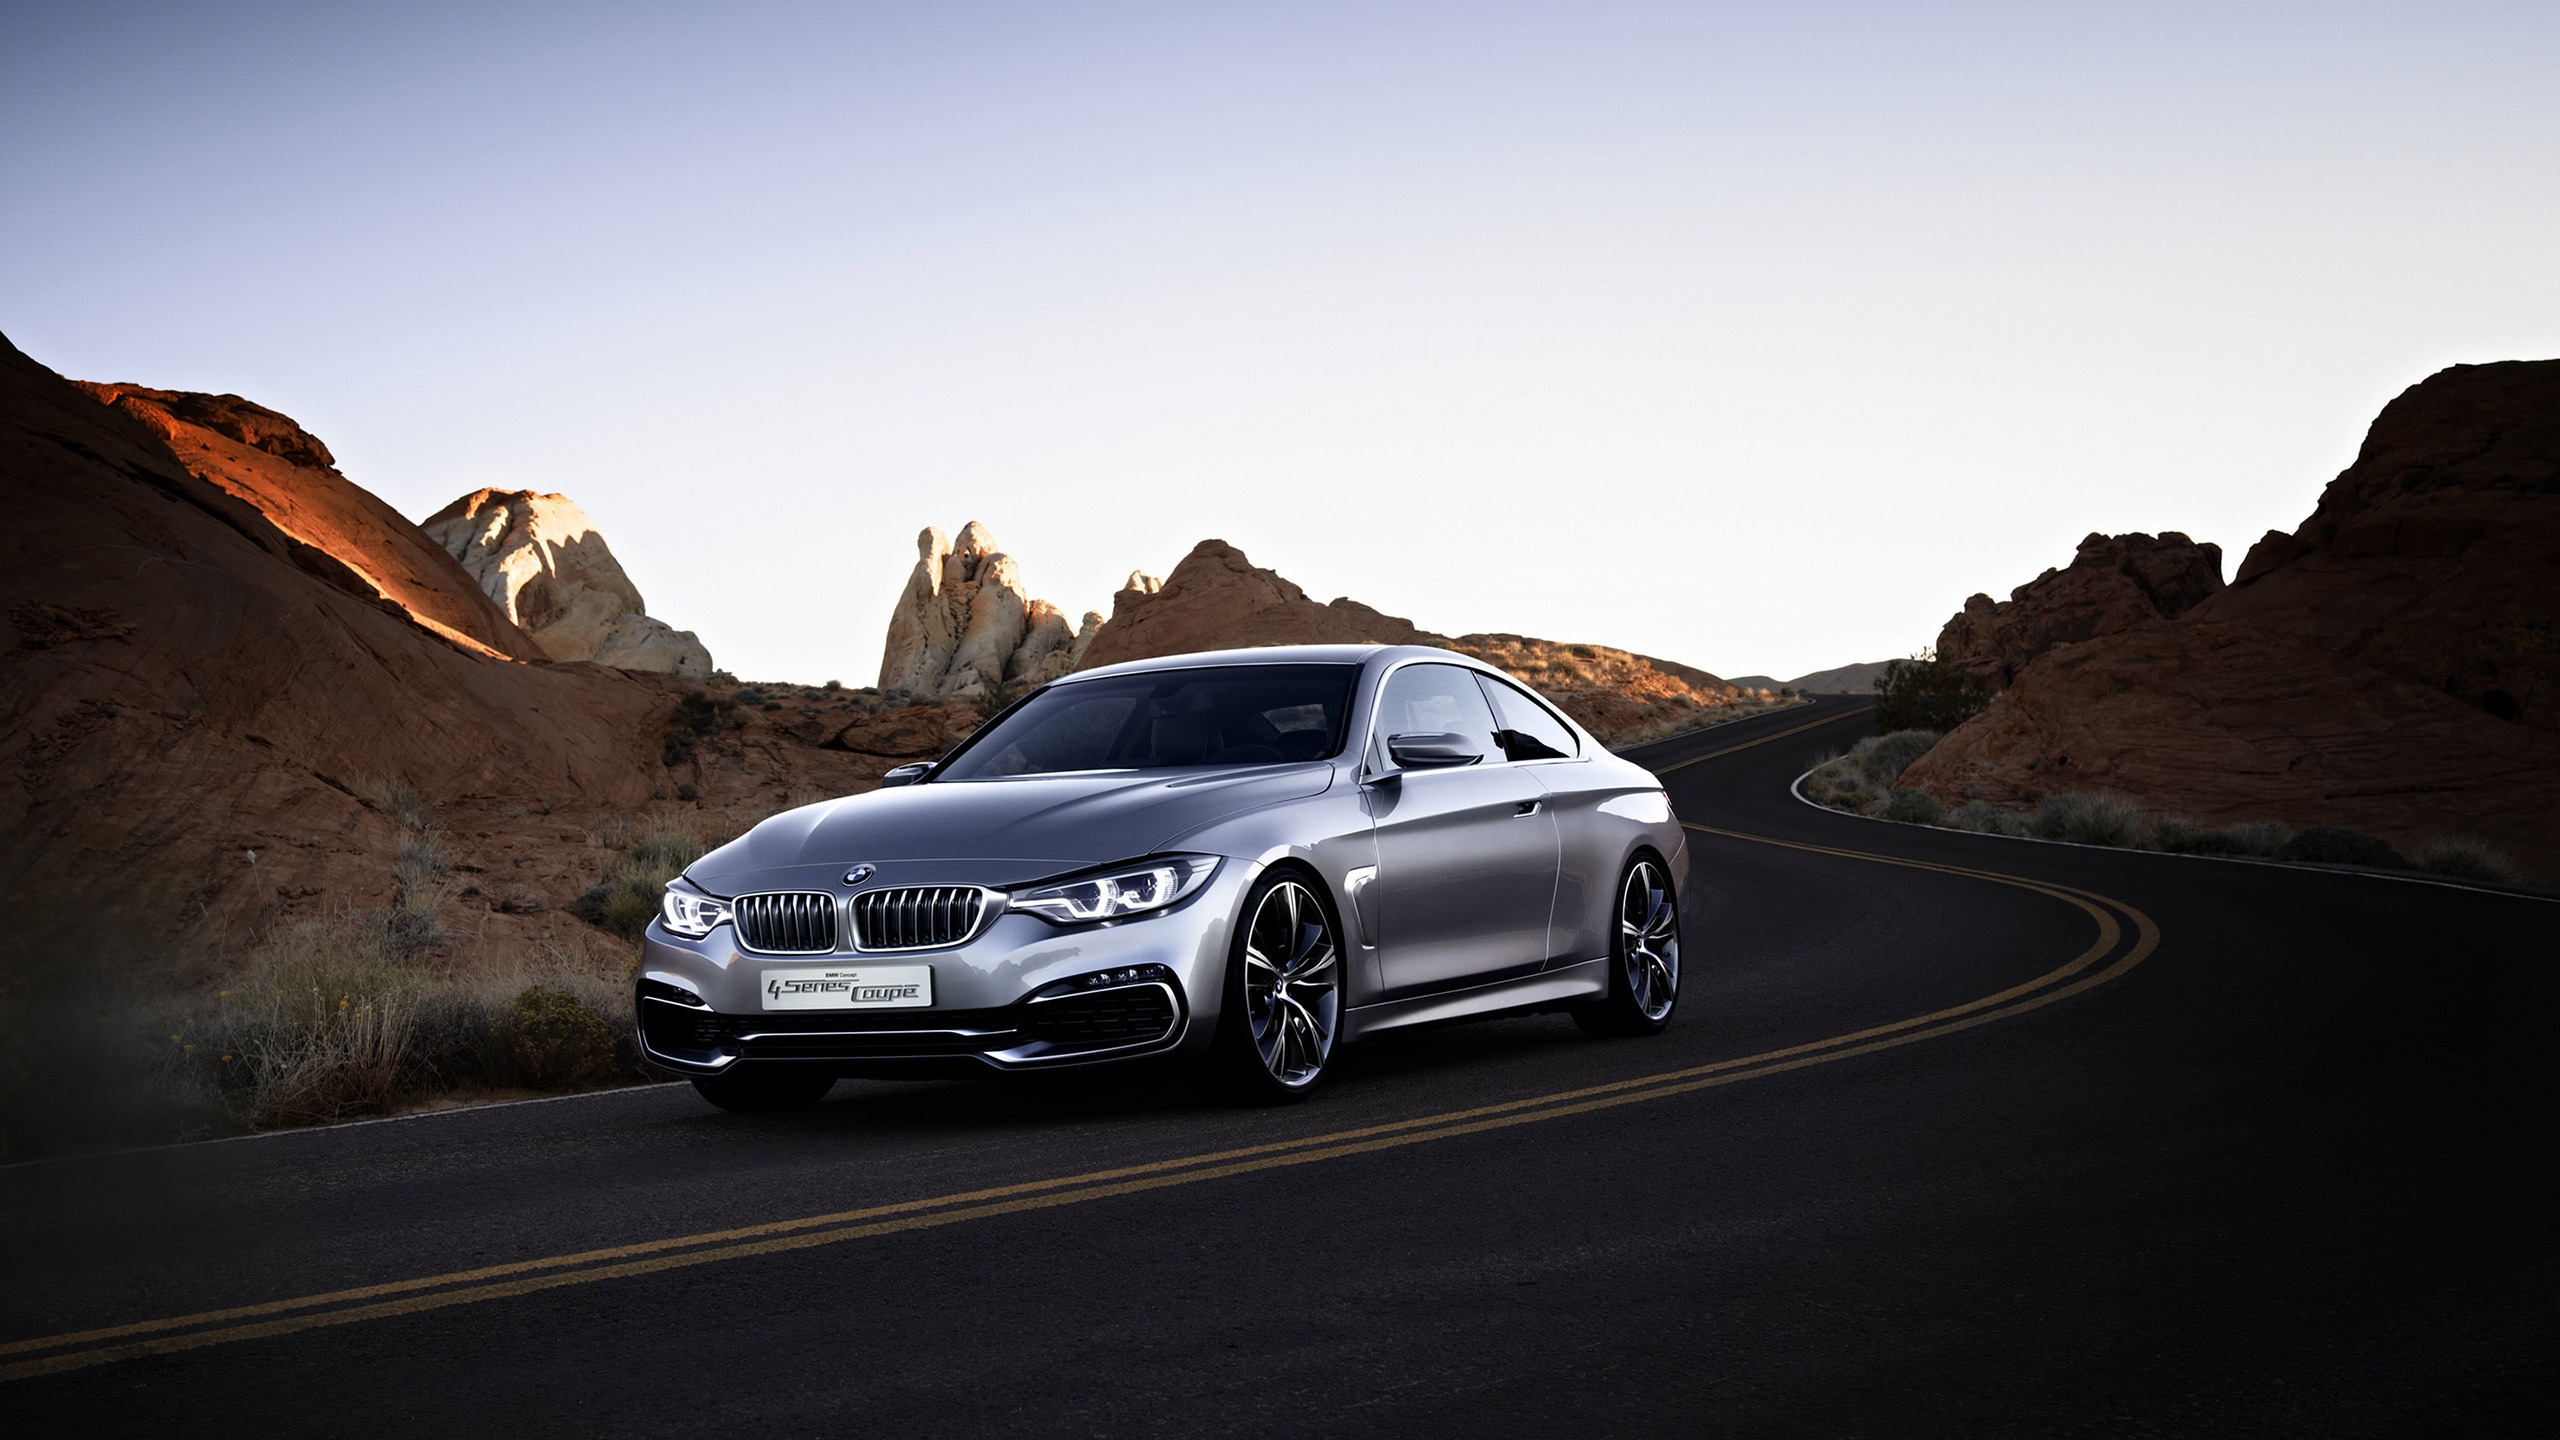 BMW 4 Series Coupe Concept for 2560x1440 HDTV resolution